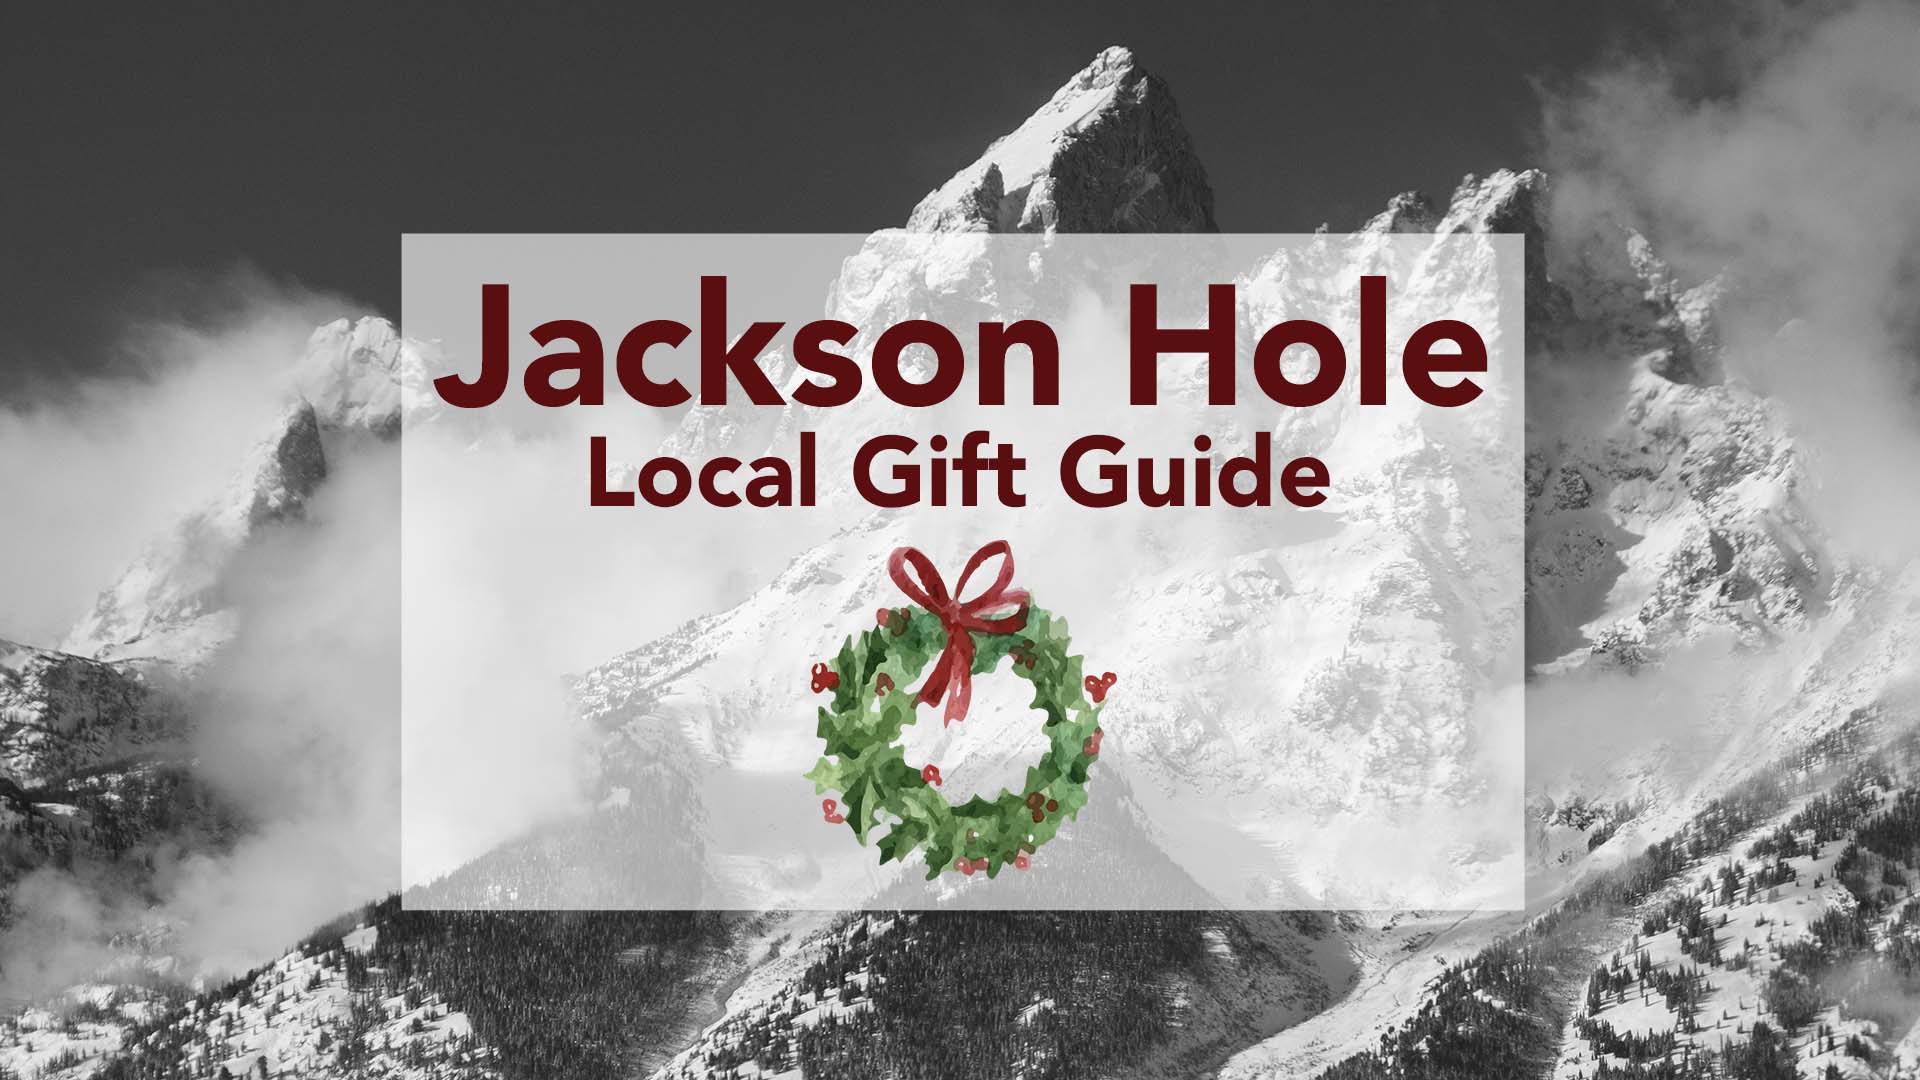 Jackson Hole Local Maker's Guide Guide - 2018